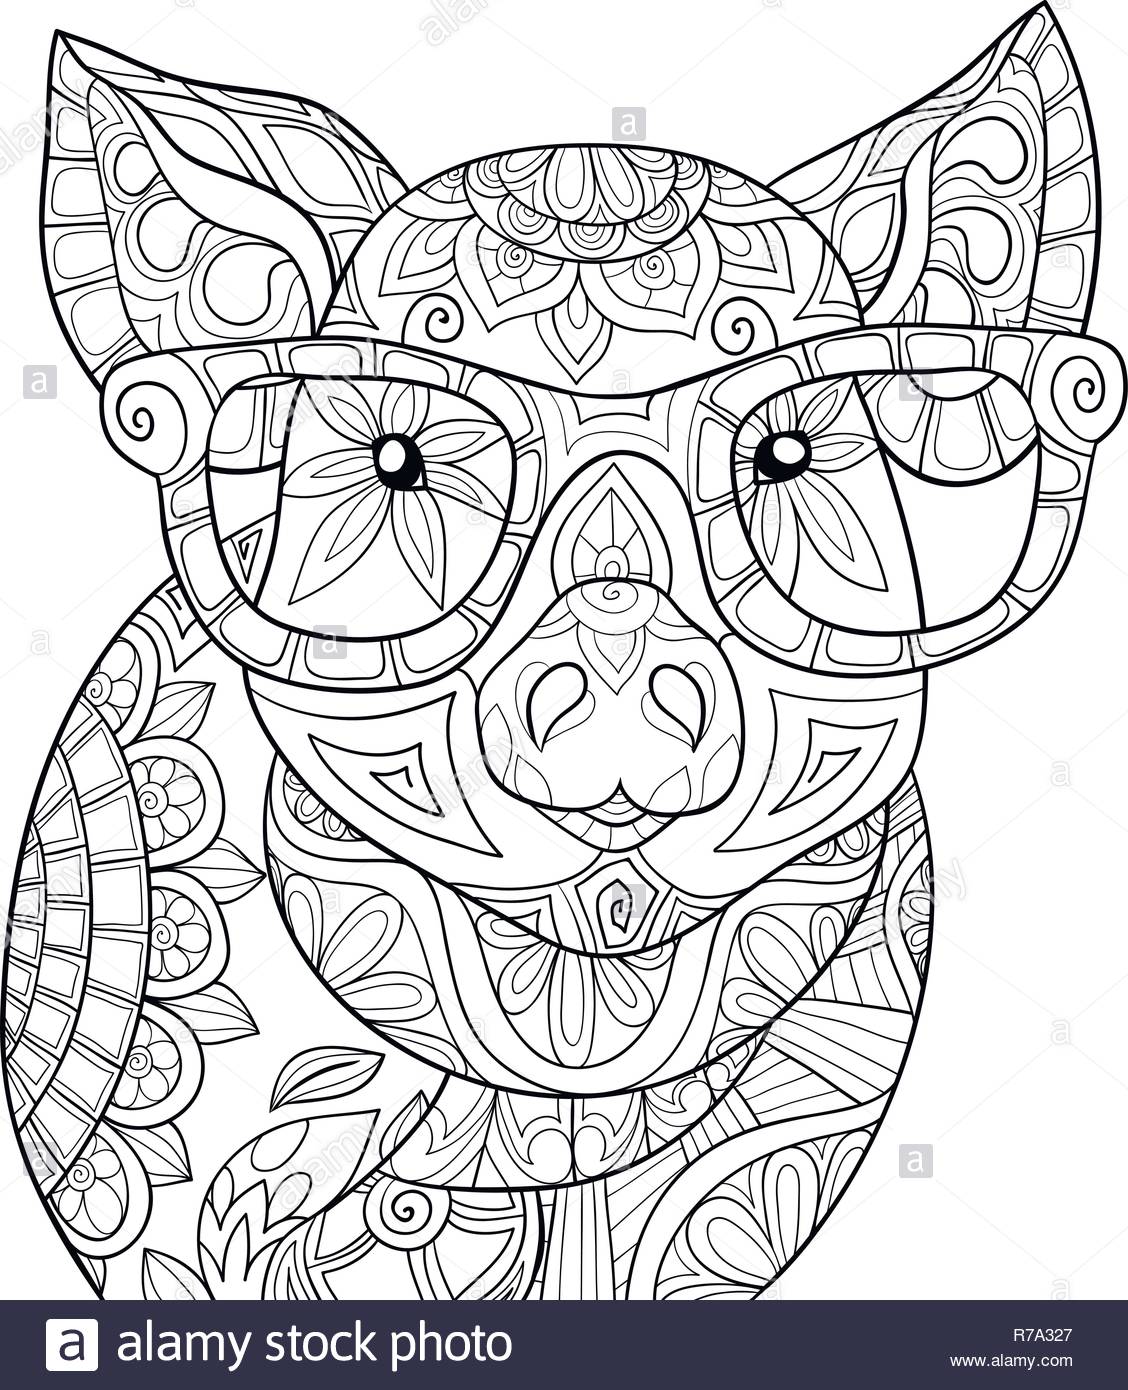 A cute pig wearing glasses image for adults.A coloring book,page for ...